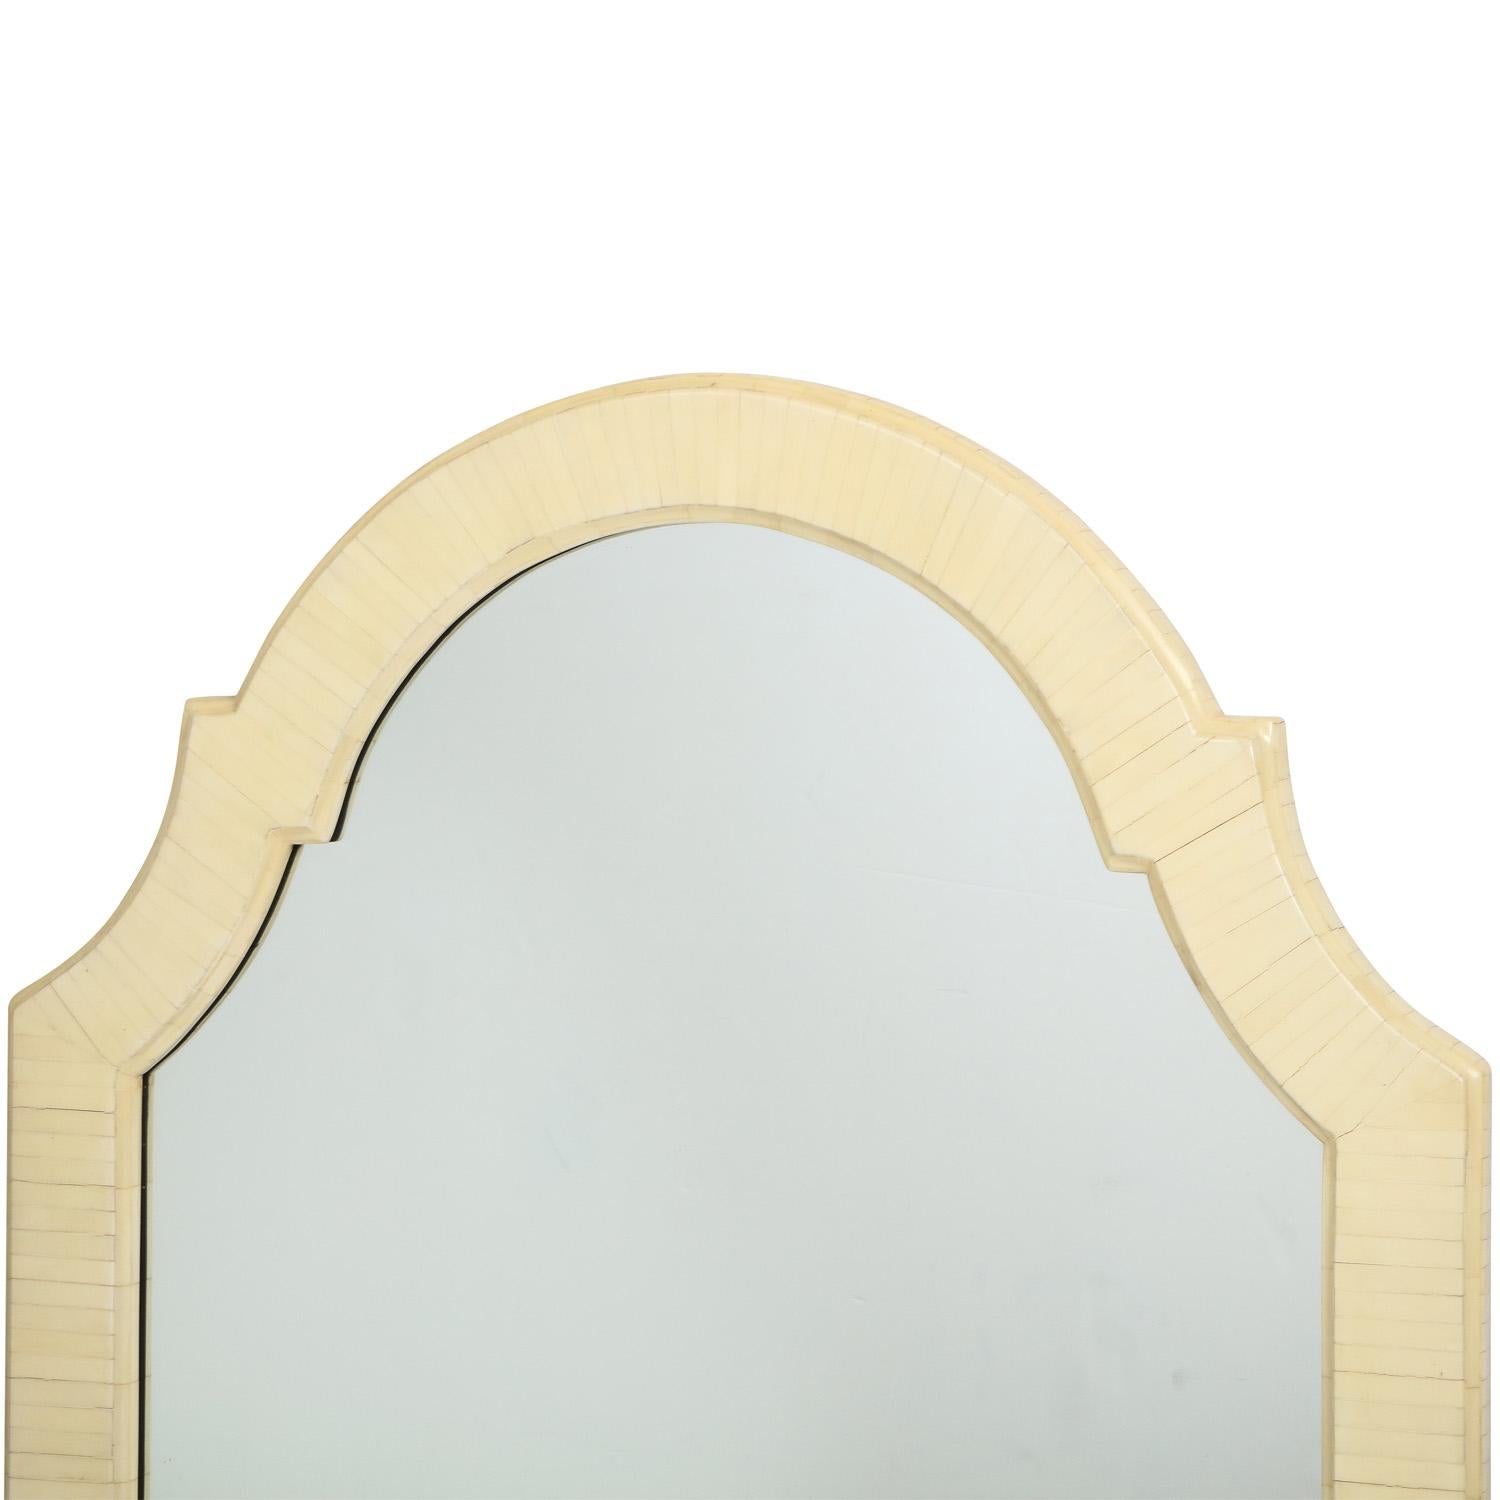 Elegant arc top mirror in tessellated bone by Enrique Garces, Columbia 1970's. The graceful form along with the luxurious material makes this mirror stand out.